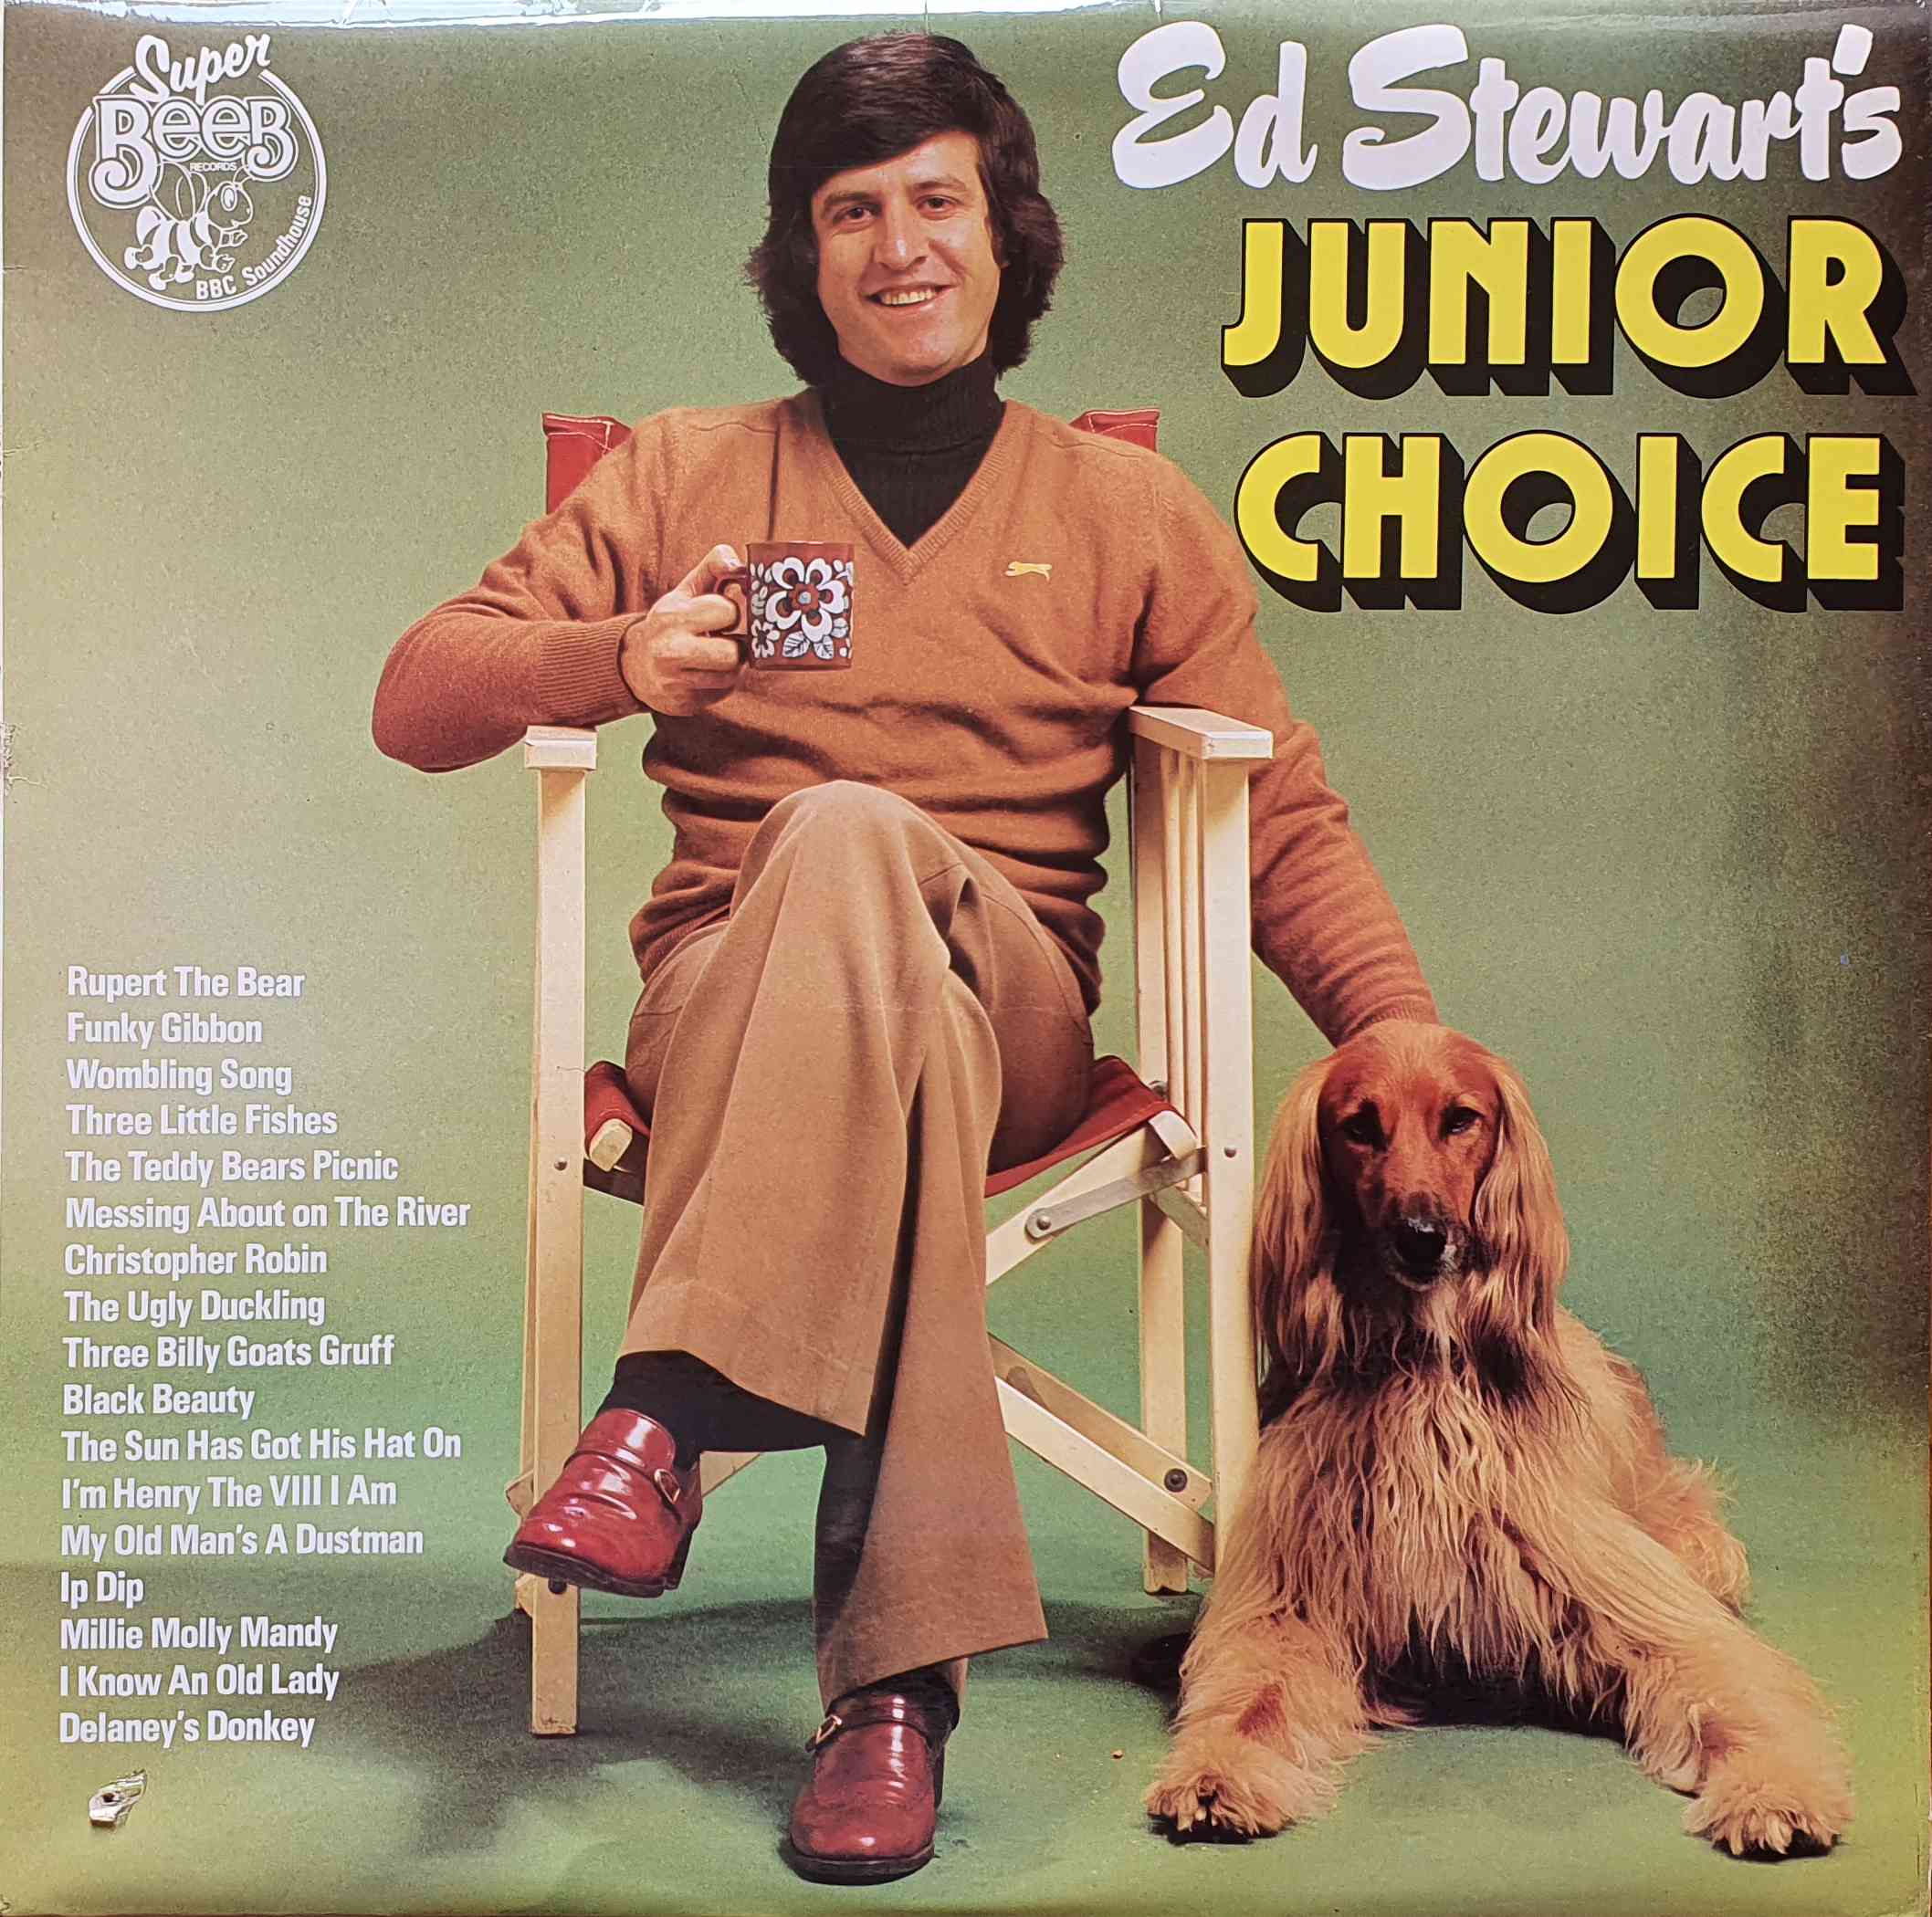 Picture of Junior choice by artist Various from the BBC albums - Records and Tapes library